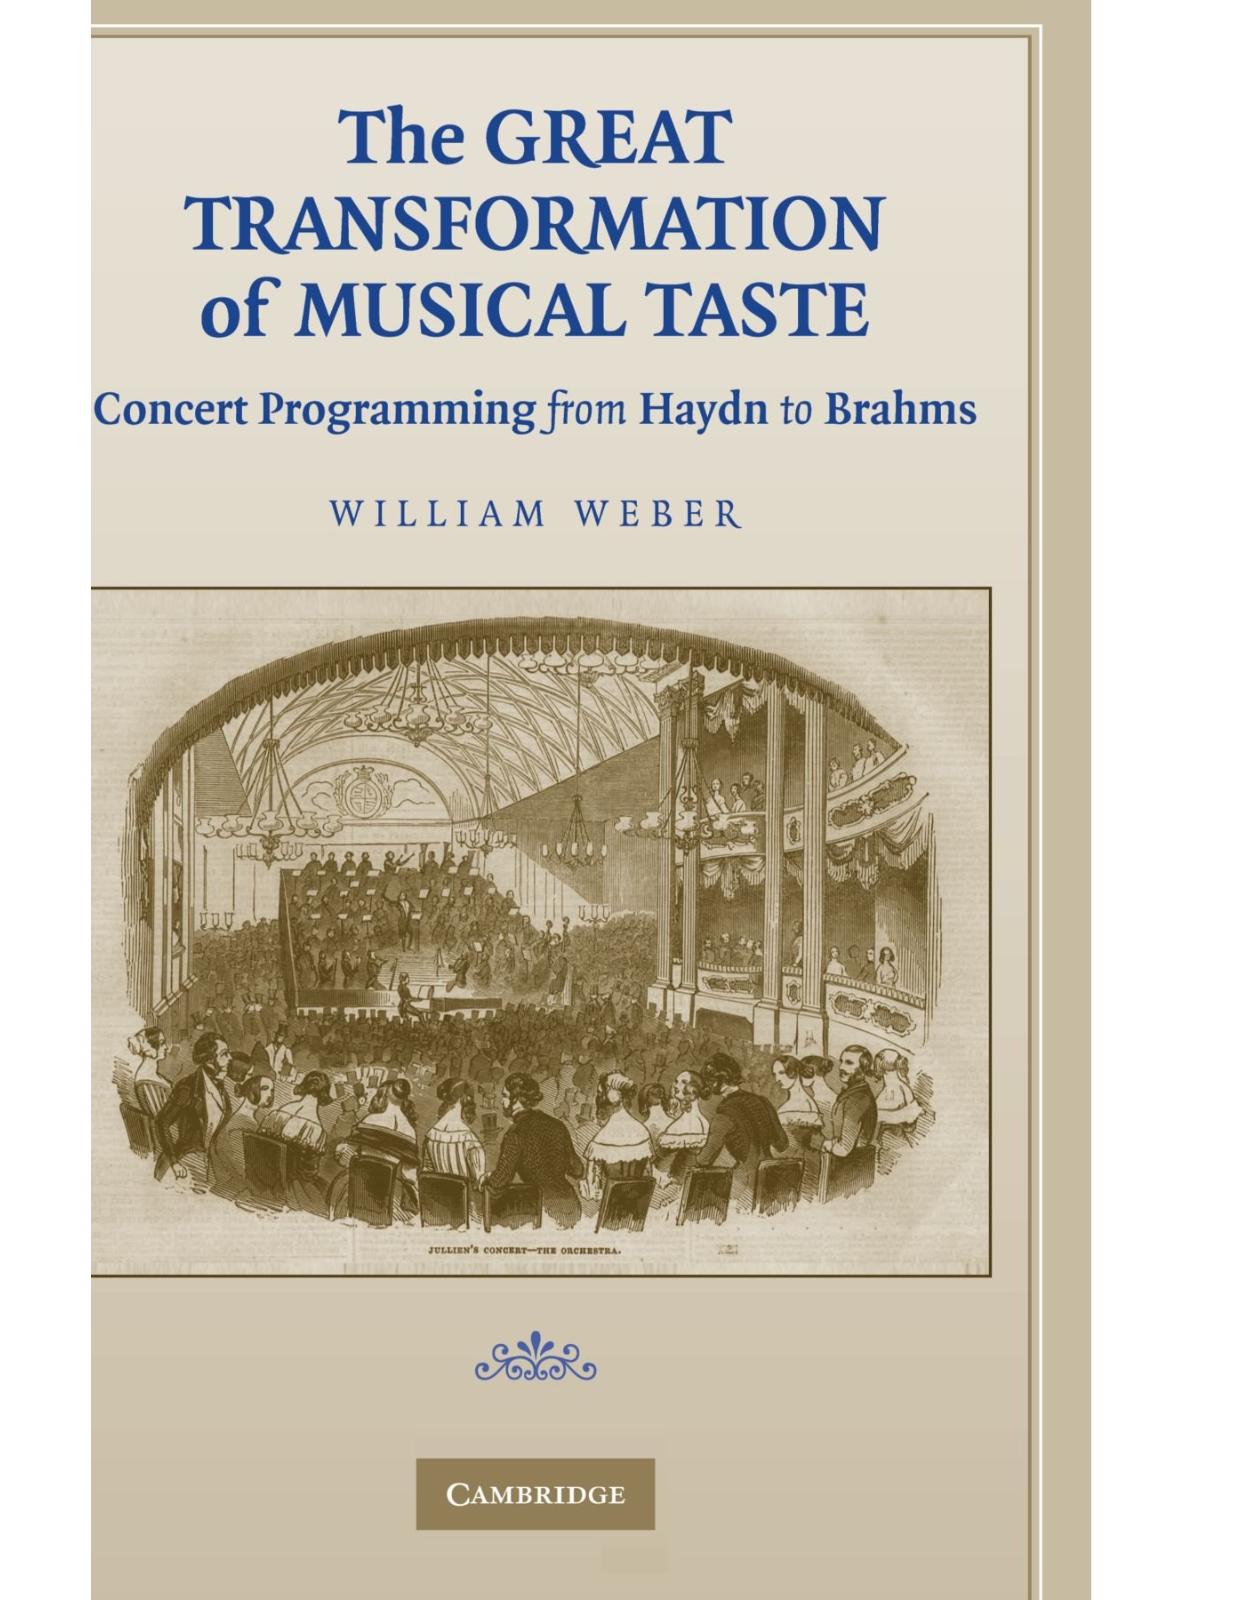 The Great Transformation of Musical Taste: Concert Programming from Haydn to Brahms